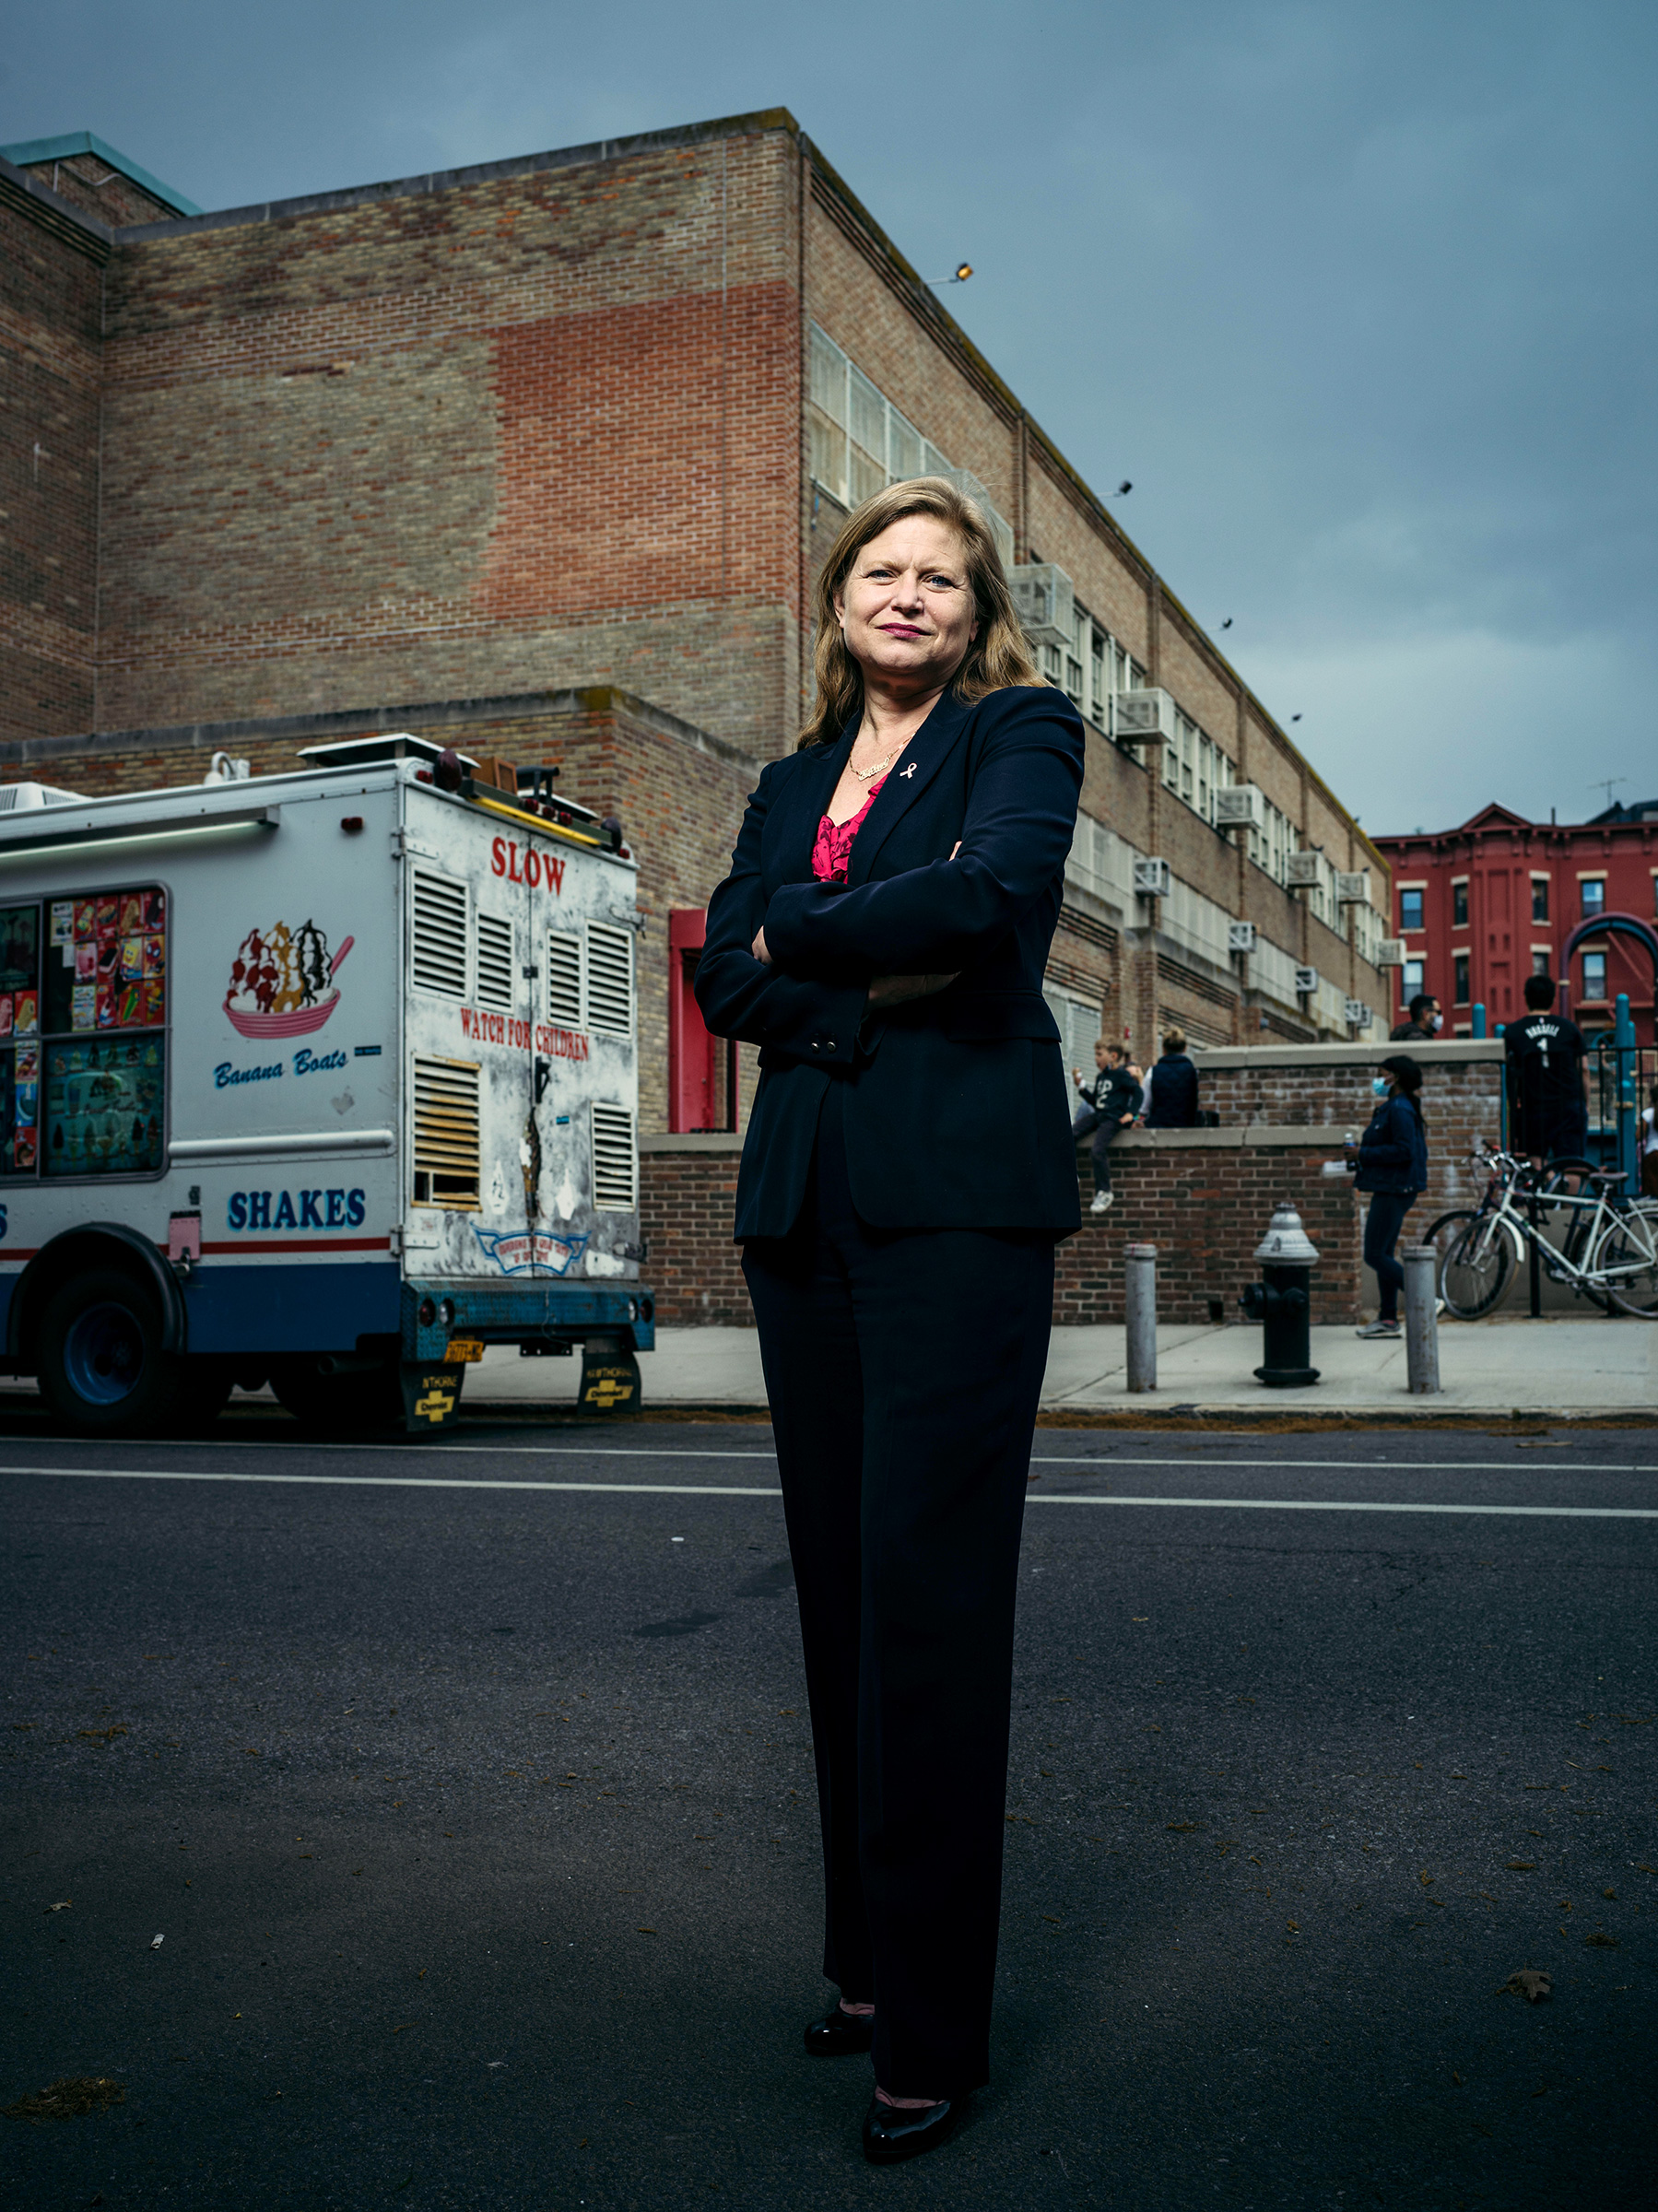 Kathryn Garcia, a longtime civil servant who served as commissioner of New York City's Sanitation Department, in Brooklyn on April 30, 2021. (Damon Winter—The New York Times/Redux)